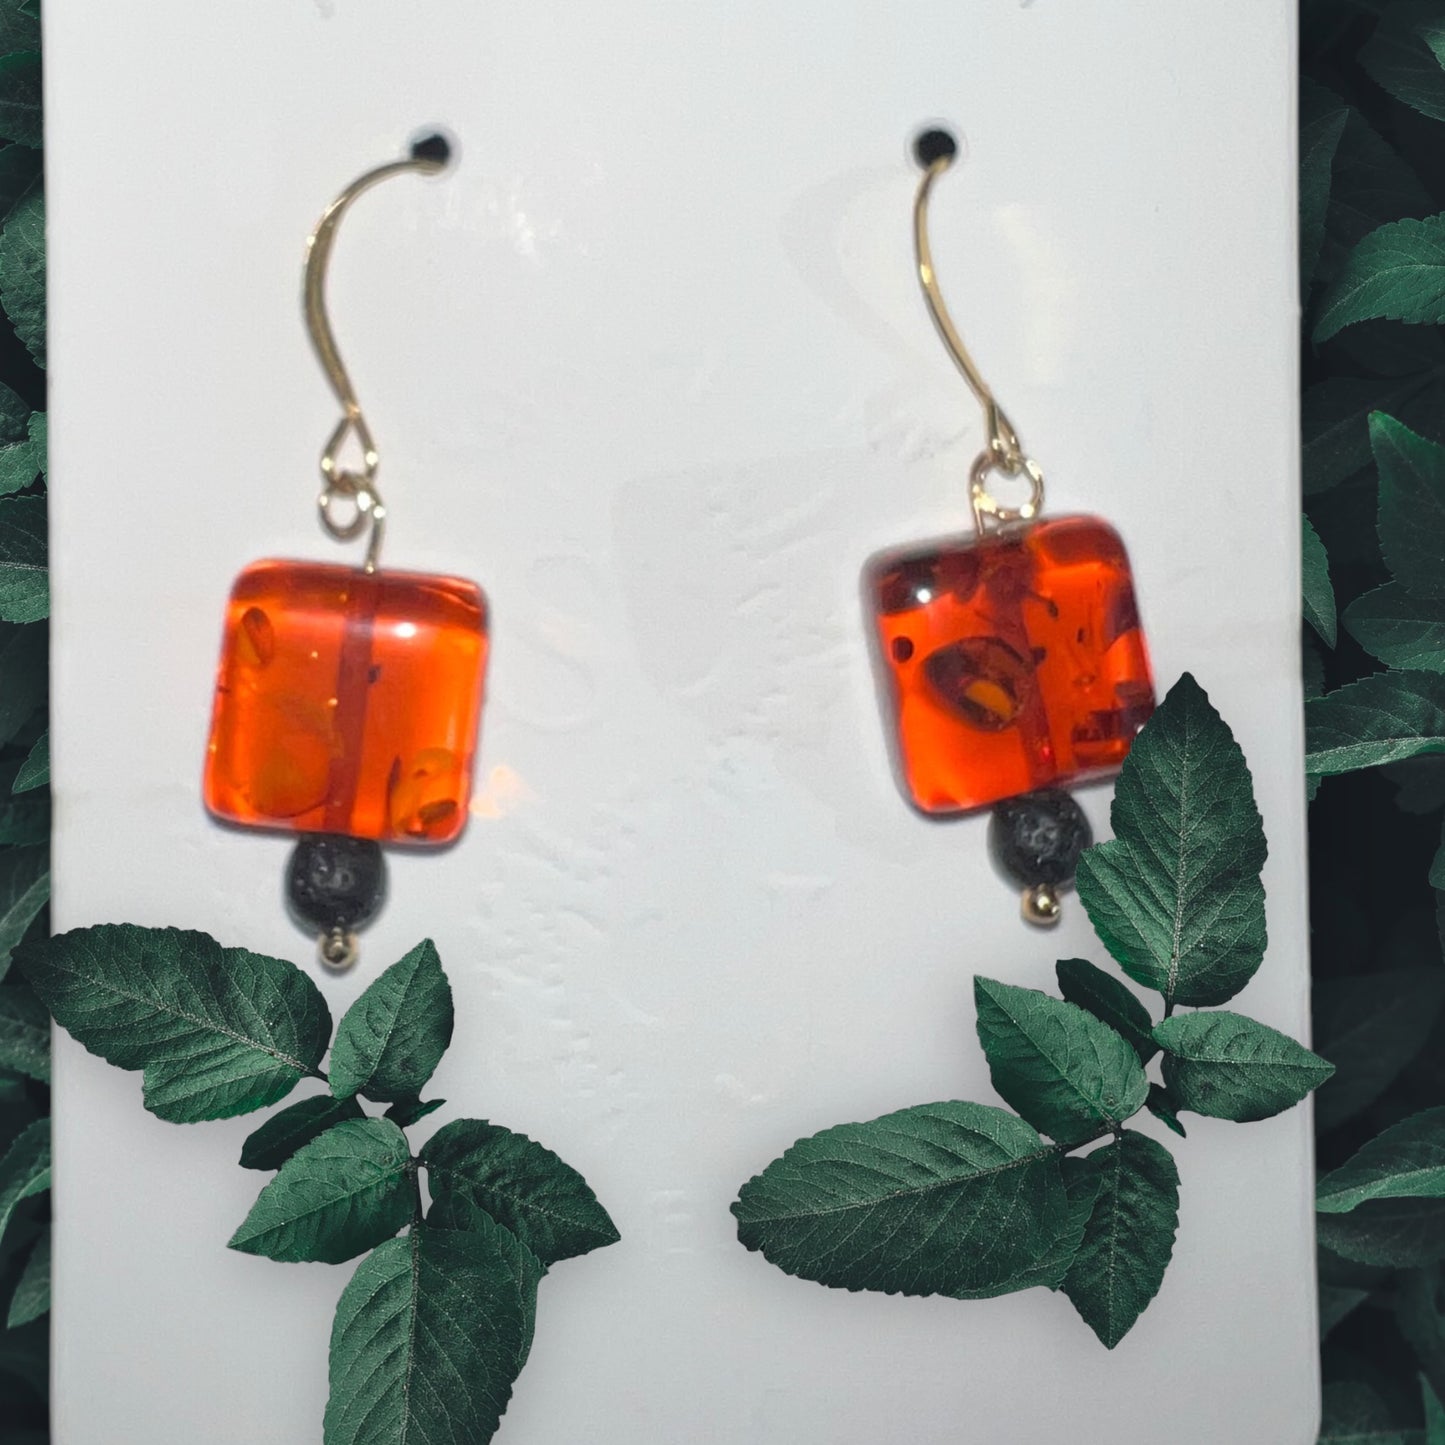 Earrings - 14 Kt Gold over 925 Sterling Silver - Genuine Baltic Amber, Lava stone.